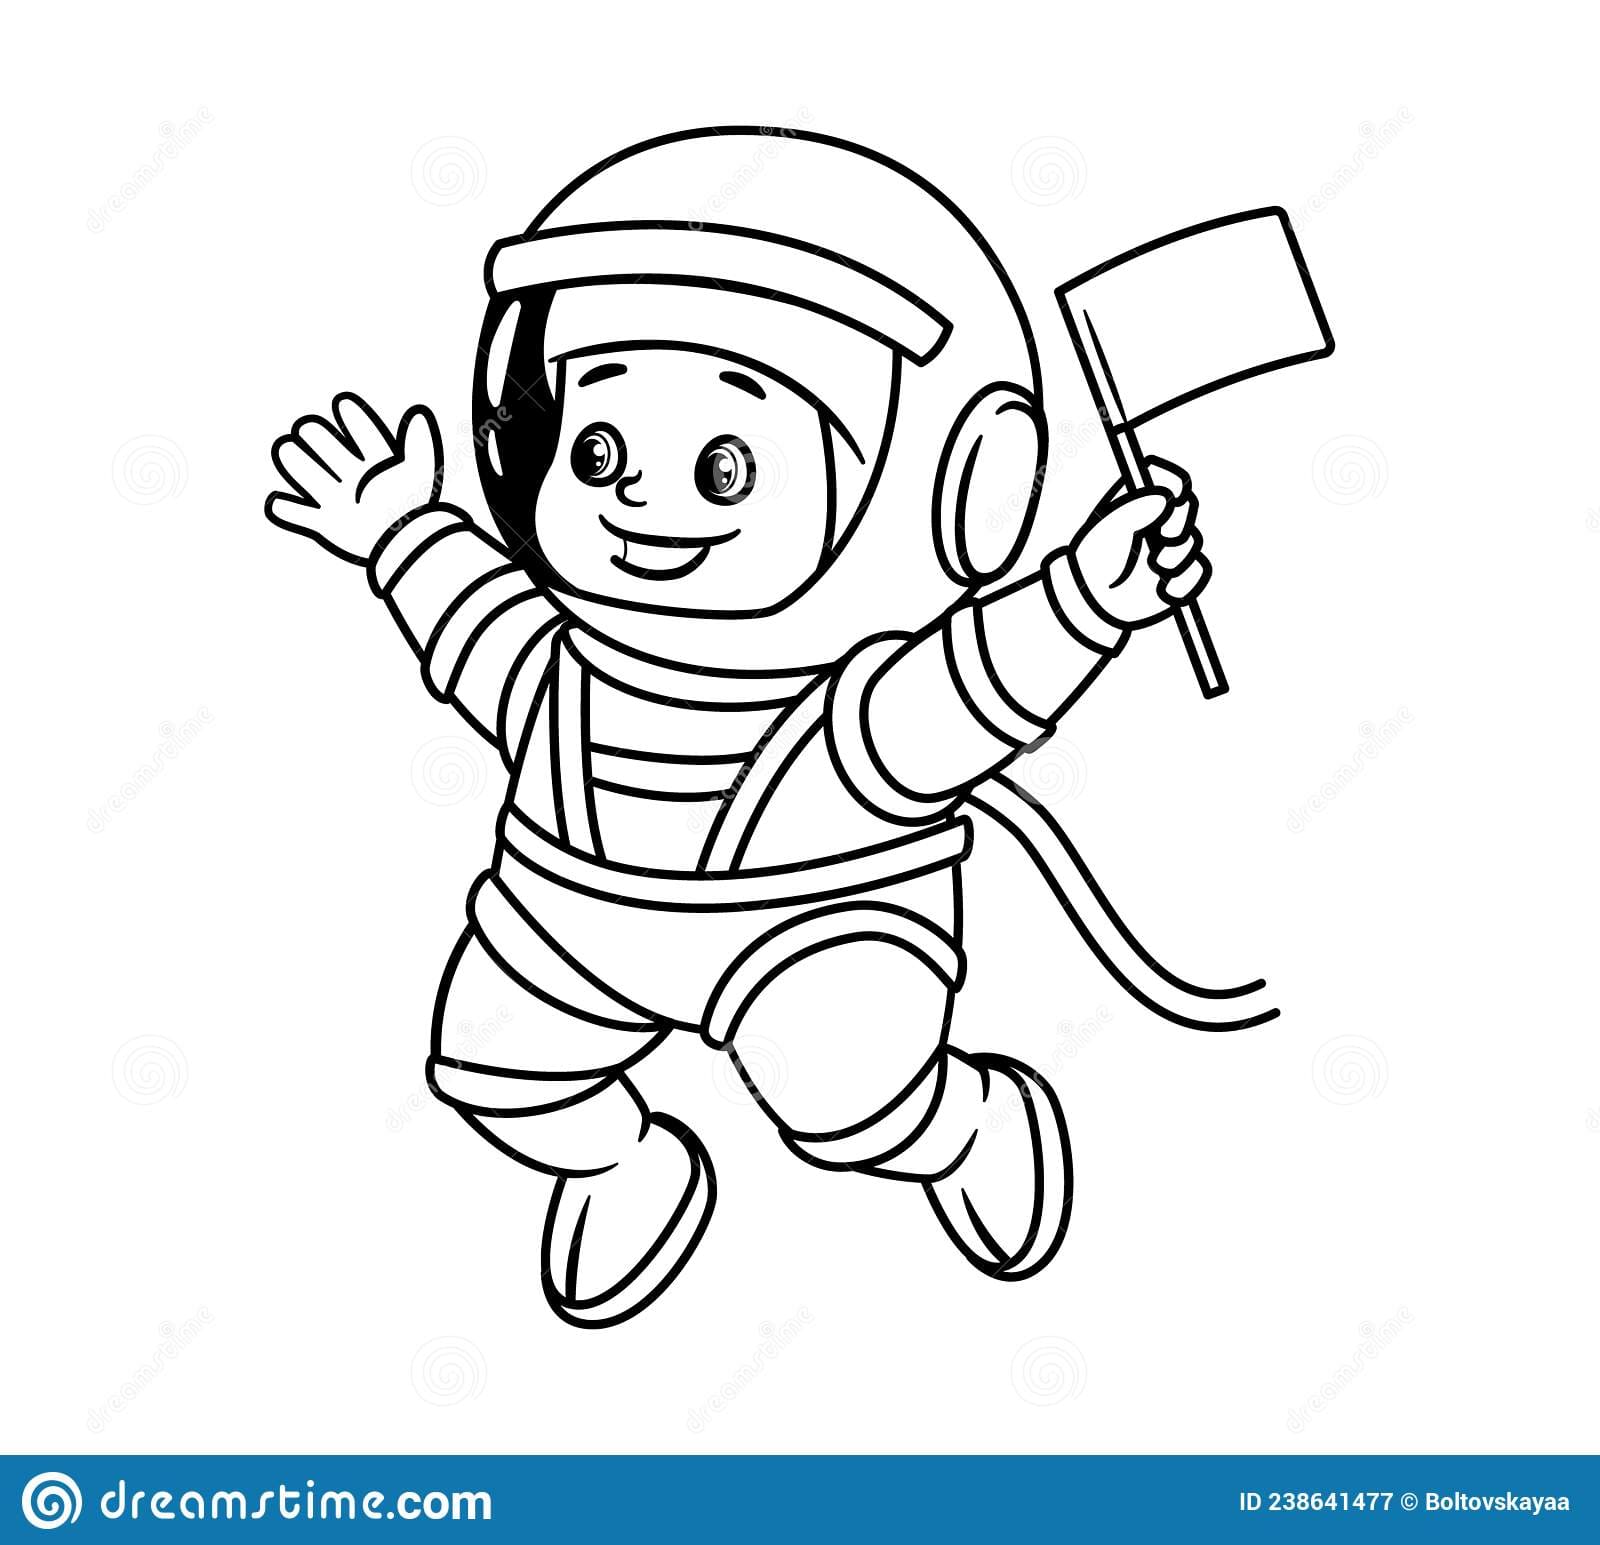 An Astronaut toddler in a helmet and a spacesuit waves a pioneer flag